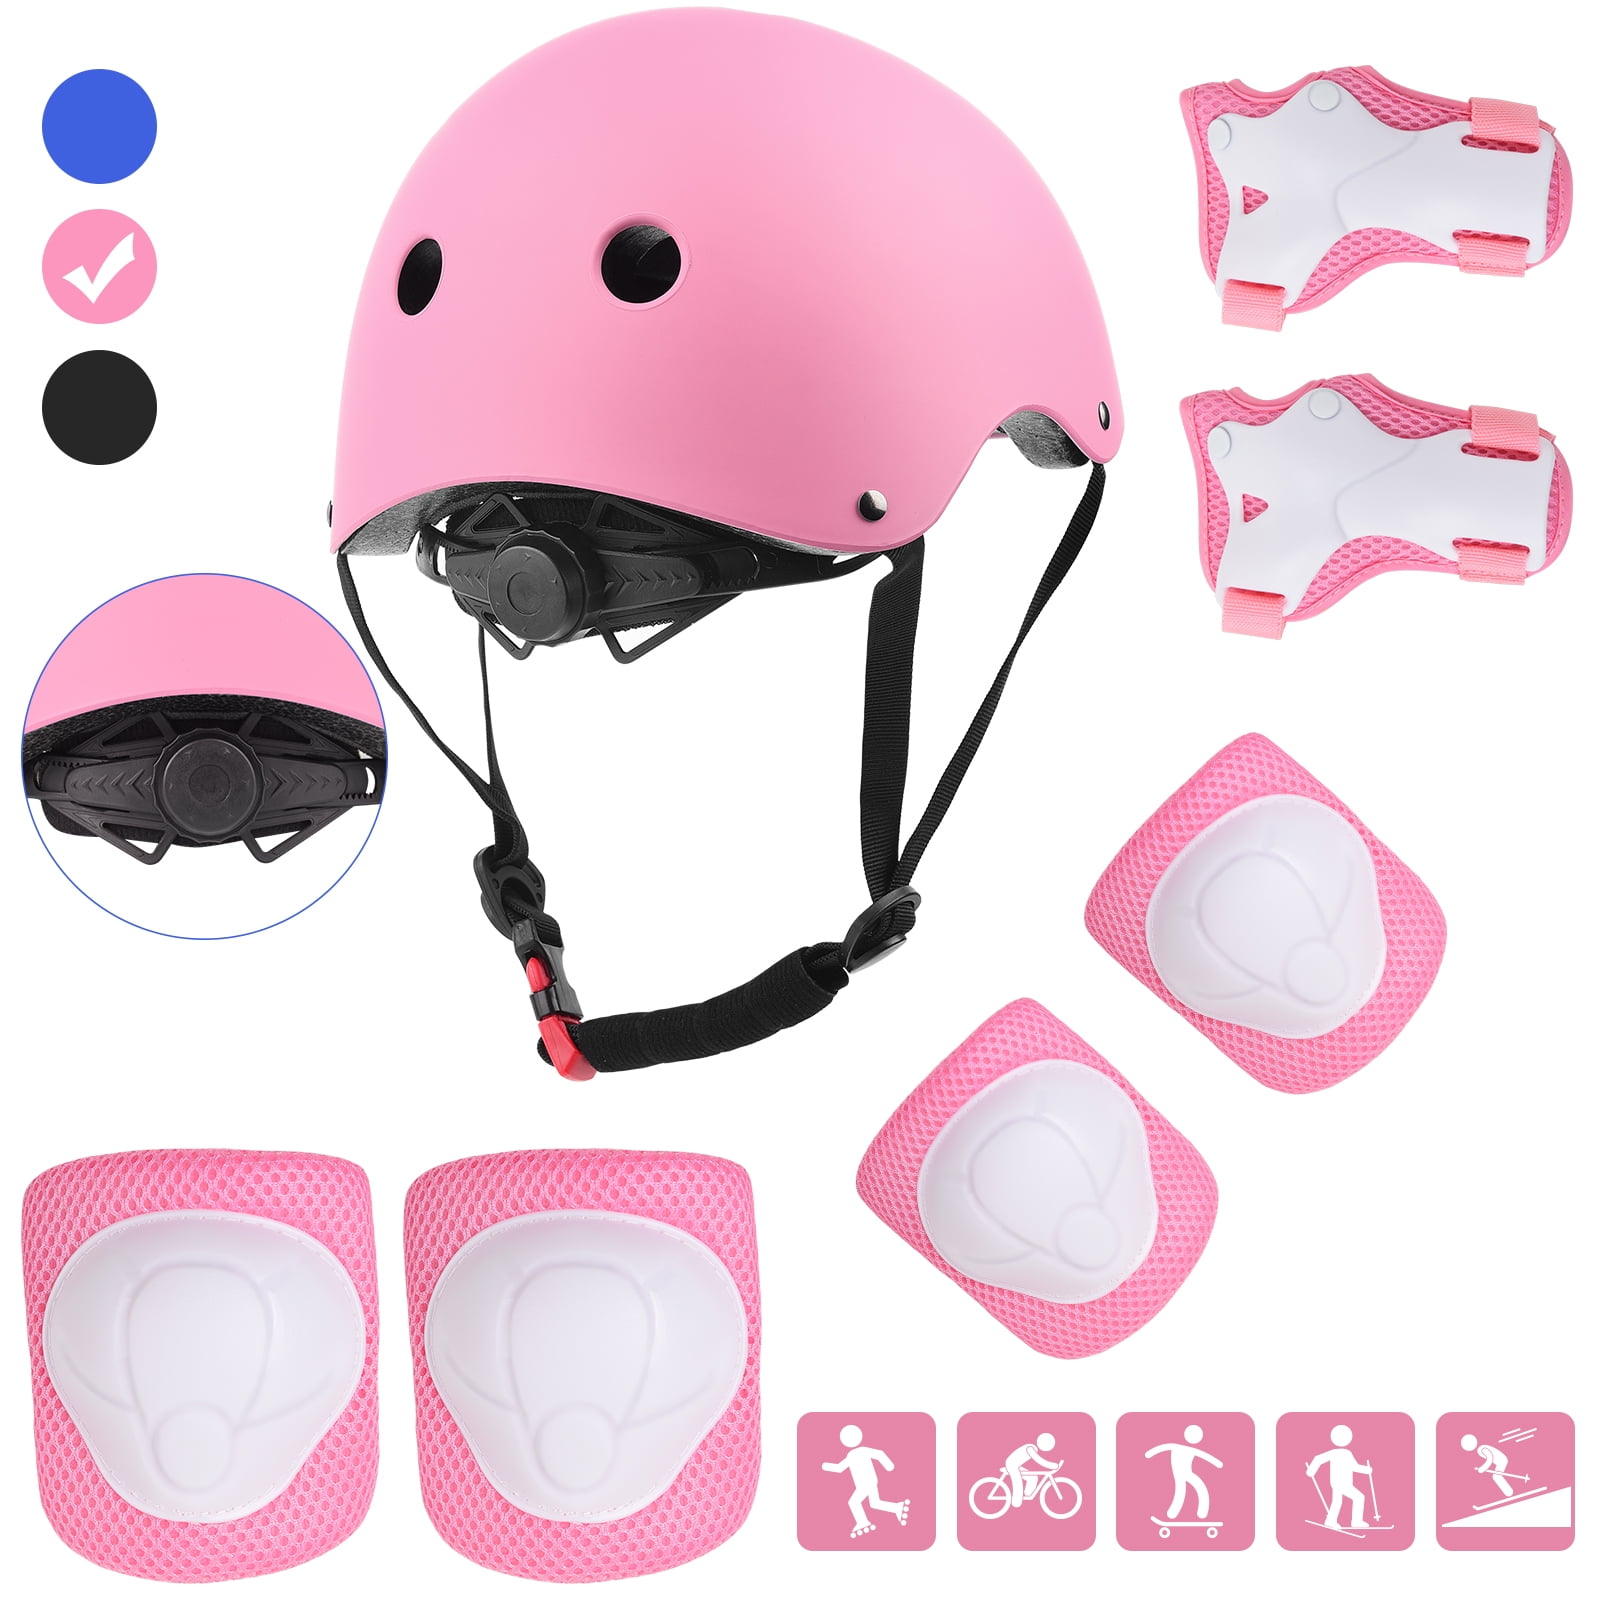 Child Safety Helmet Knee Pads and Elbow Pads Set Bicycle Scooter 